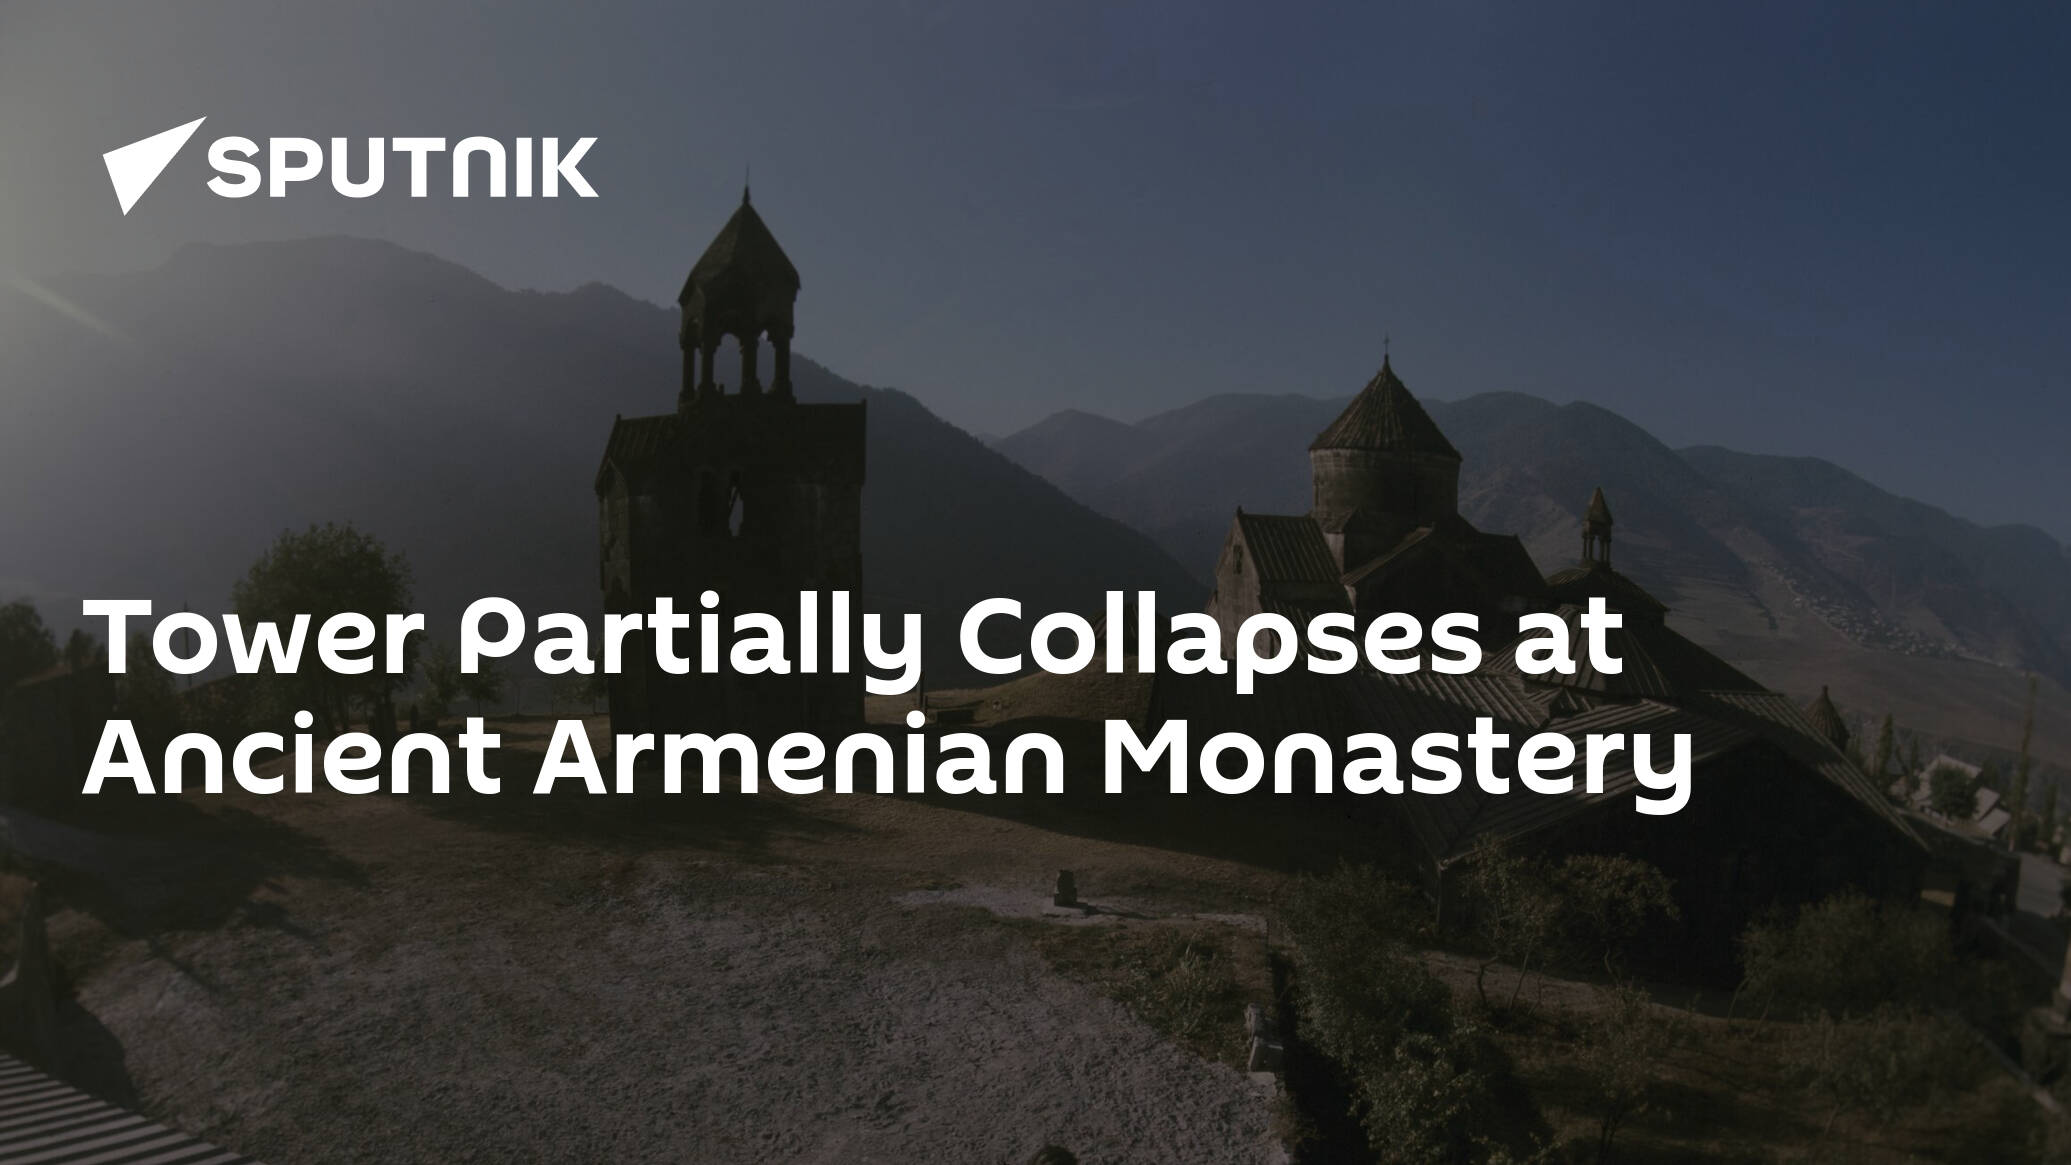 Tower Partially Collapses at Ancient Armenian Monastery